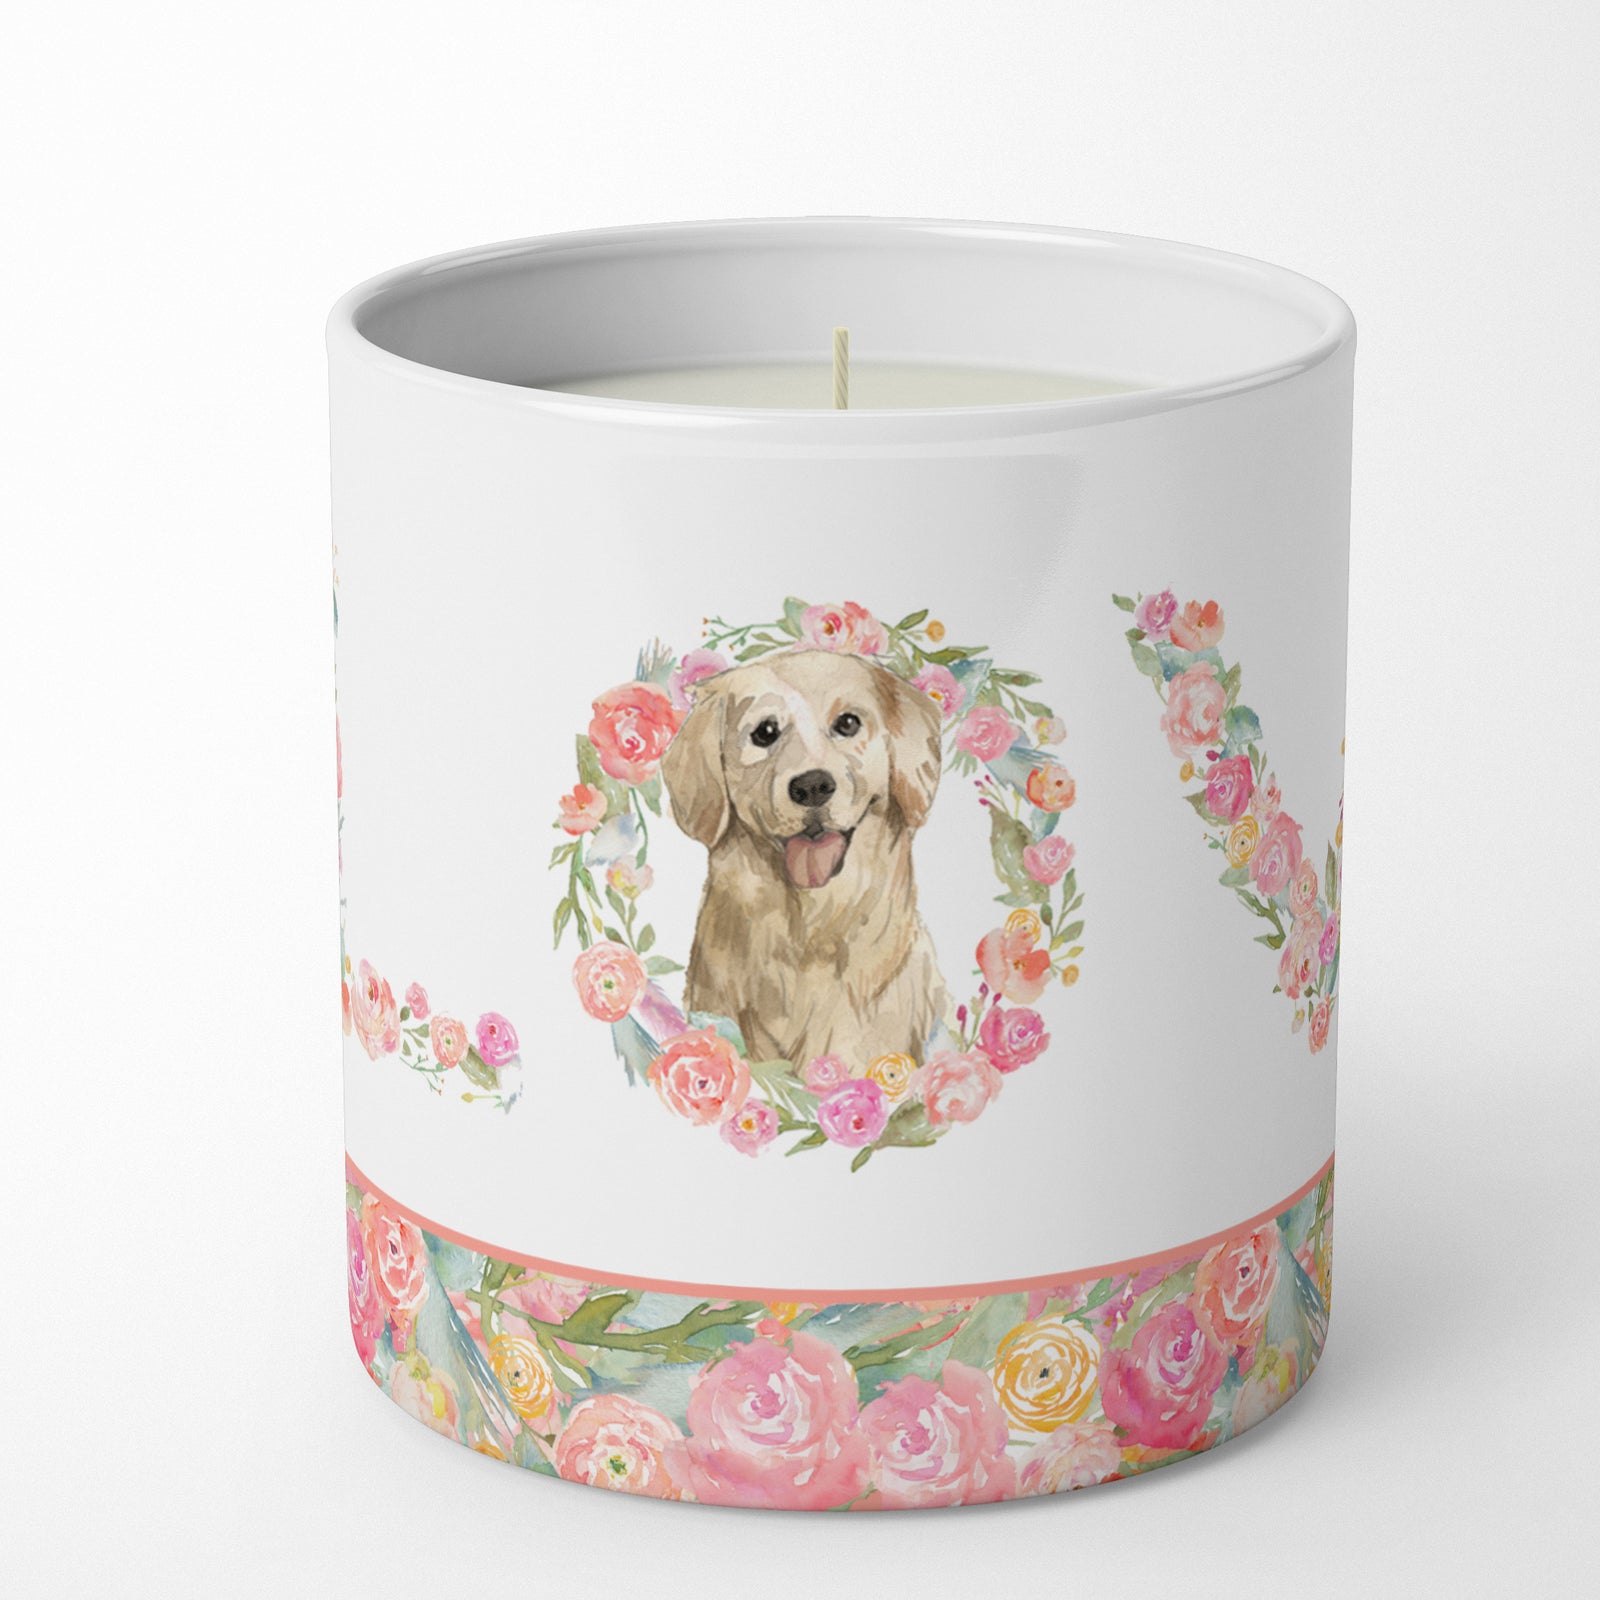 Buy this Golden Retriever Love 10 oz Decorative Soy Candle